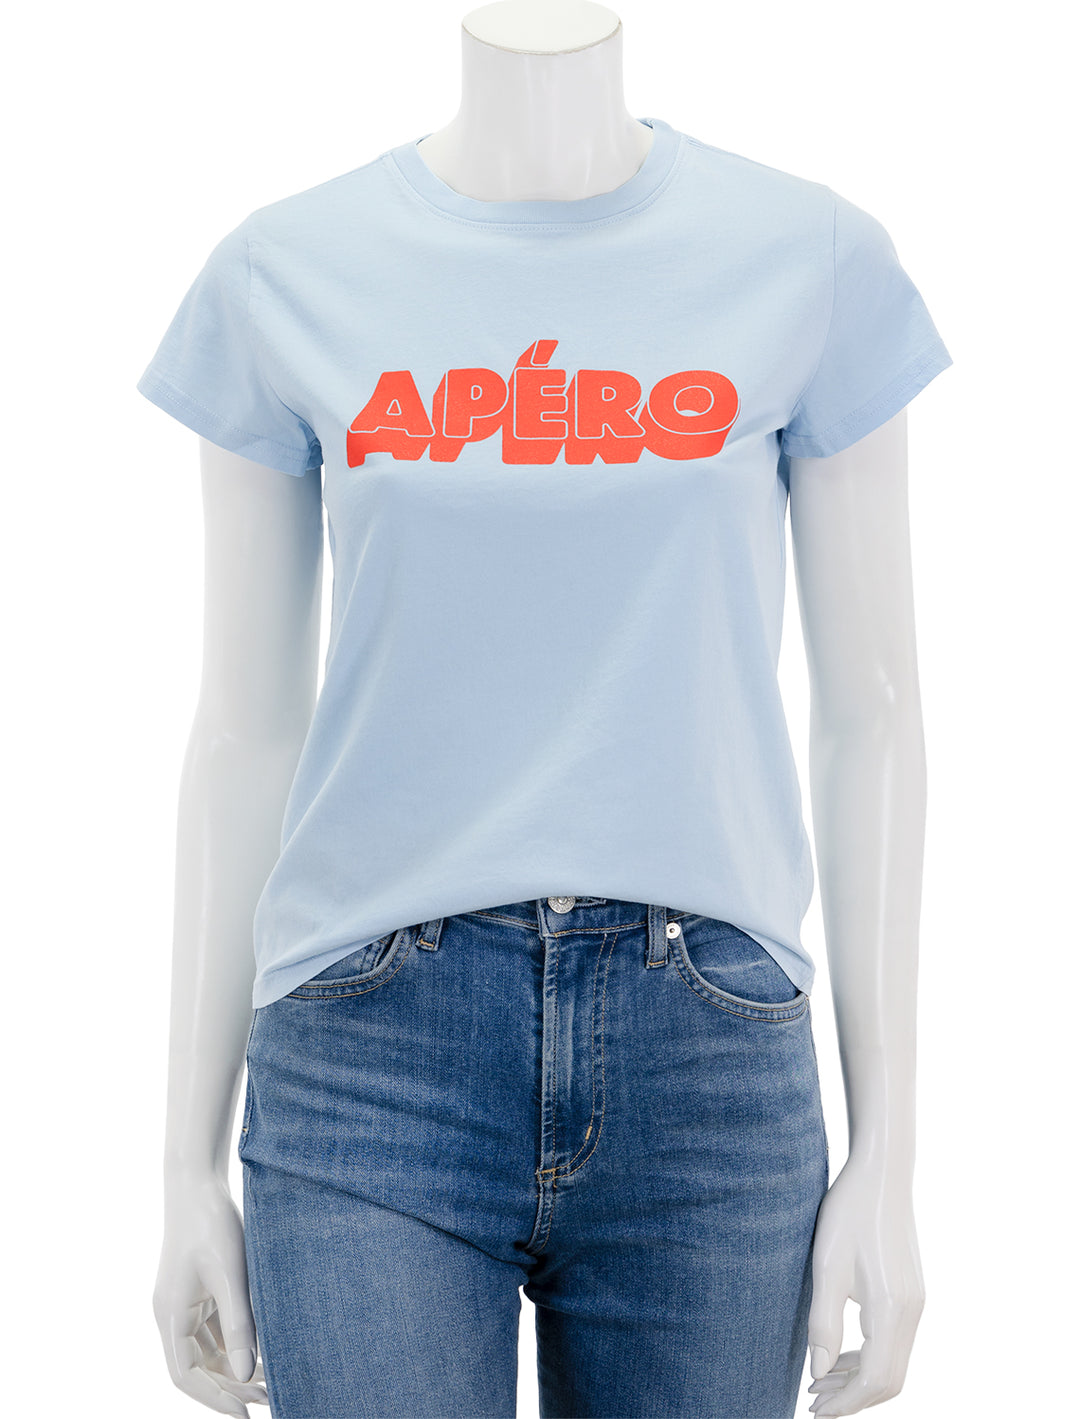 Front view of Clare V.'s apero light blue classic tee.